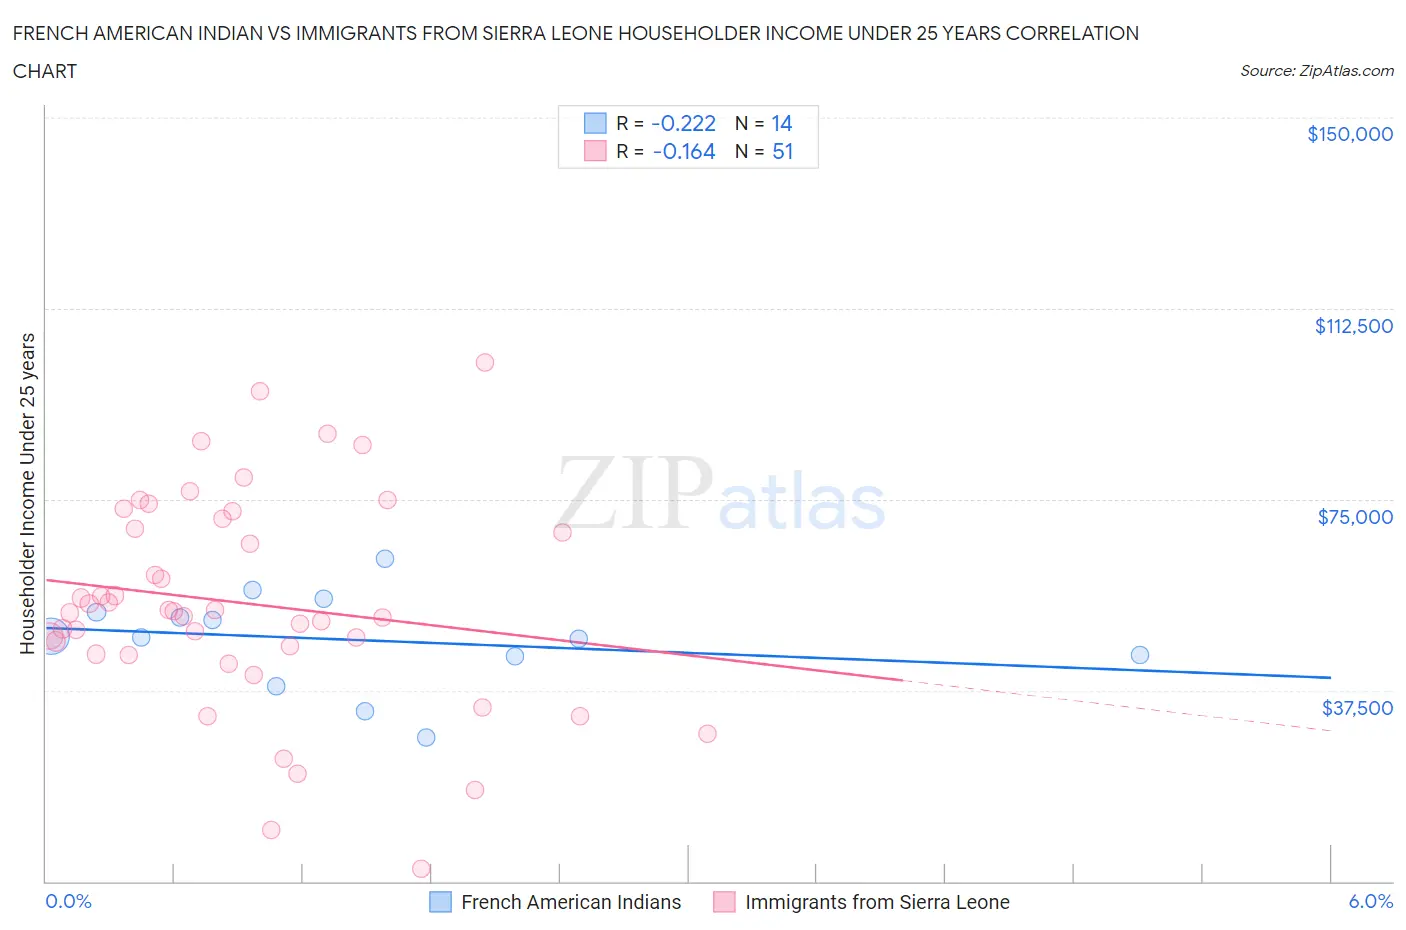 French American Indian vs Immigrants from Sierra Leone Householder Income Under 25 years